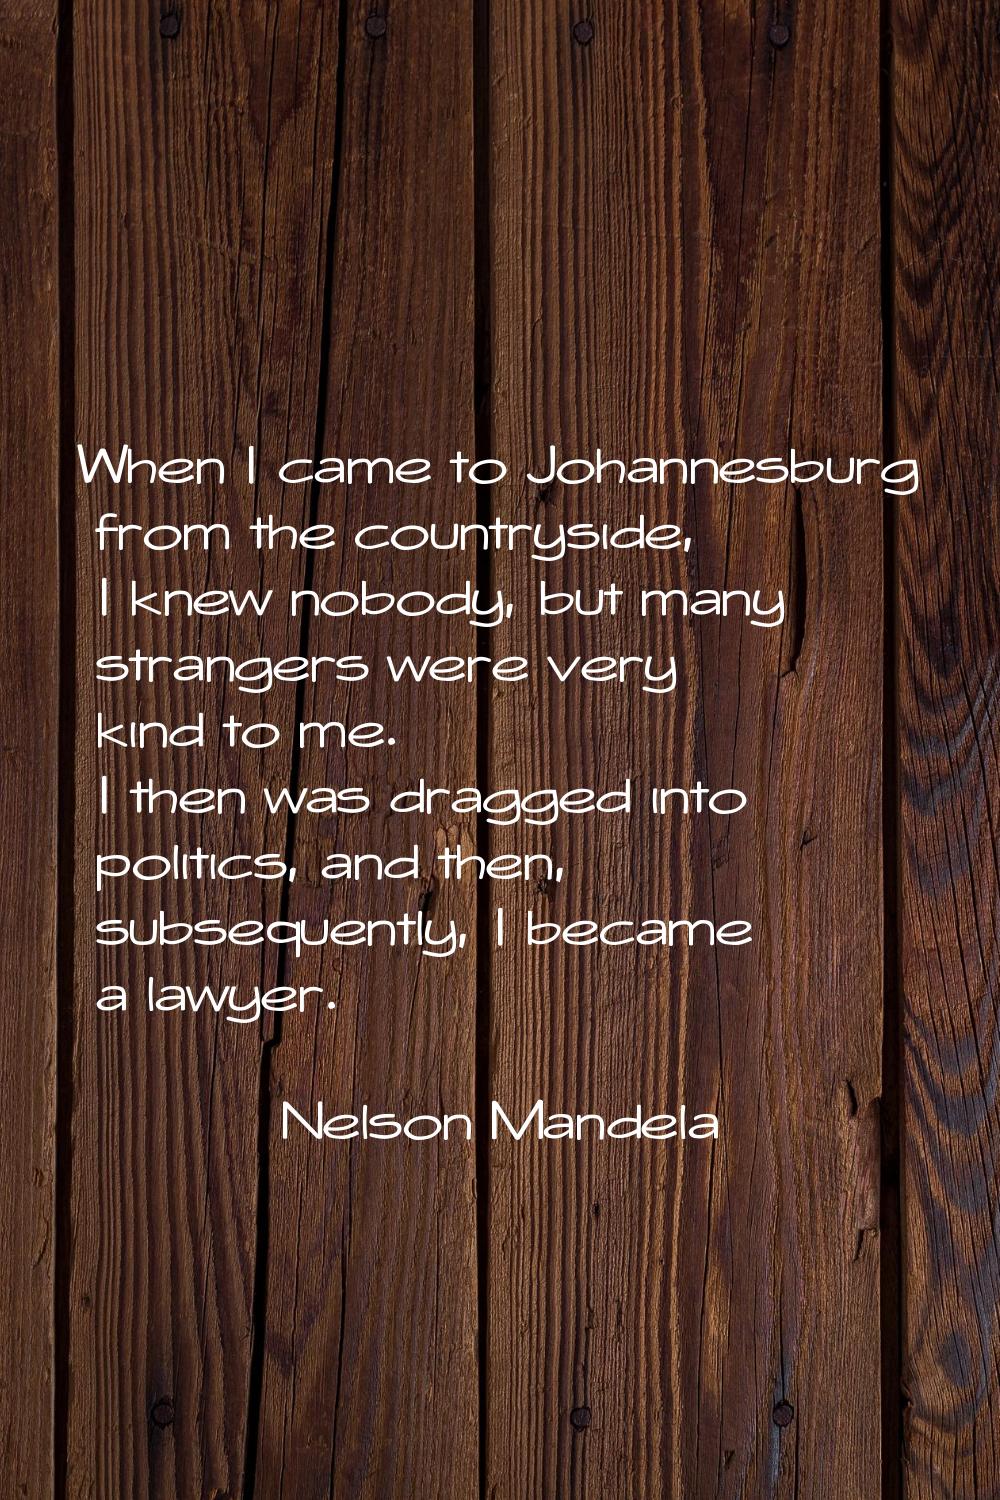 When I came to Johannesburg from the countryside, I knew nobody, but many strangers were very kind 